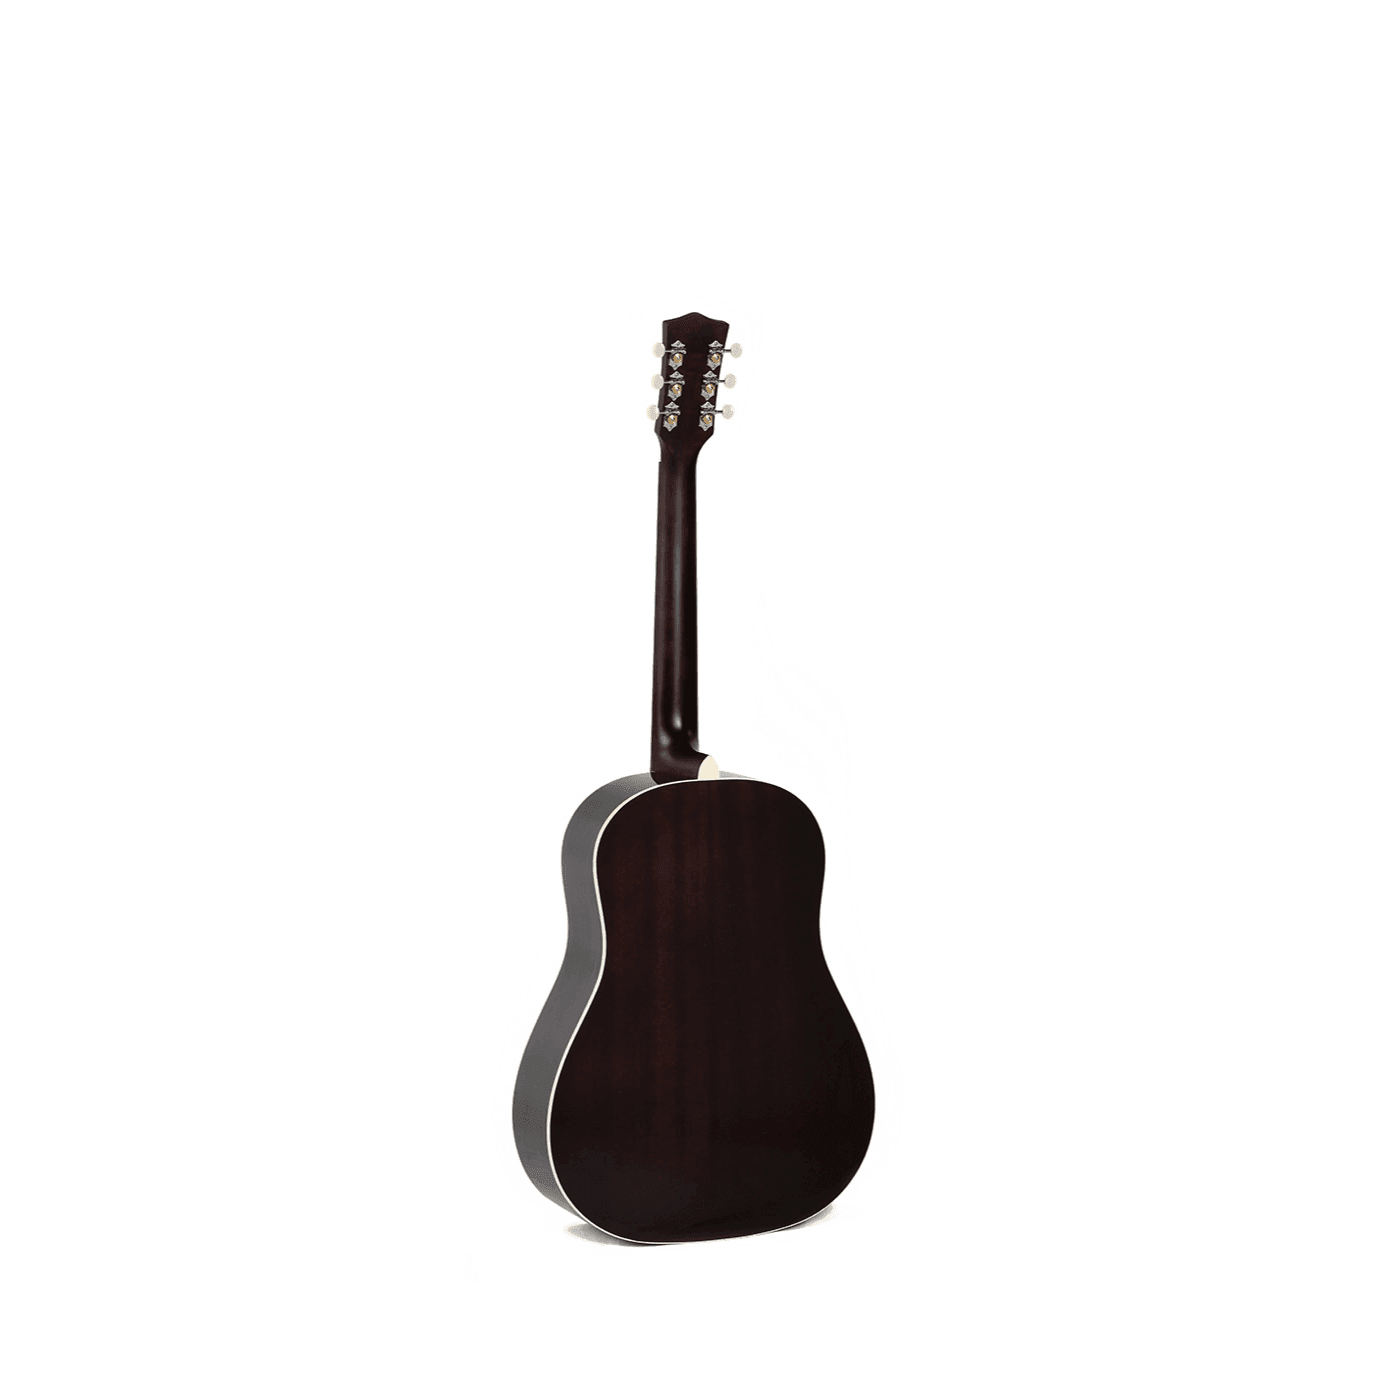 J45 Style Sunburst Acoustic Guitar - Guitars - Acoustic by Sigma at Muso's Stuff